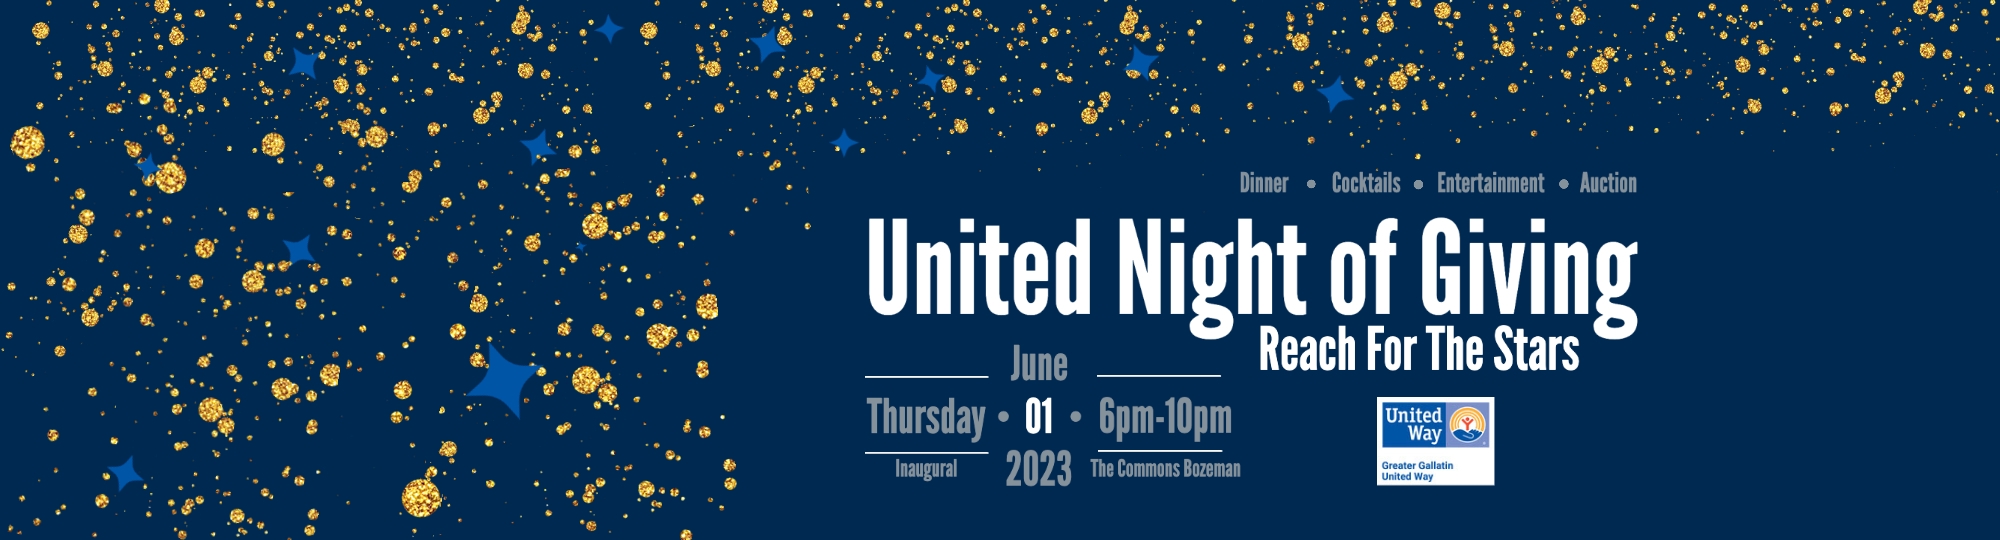 United Night of Giving graphic